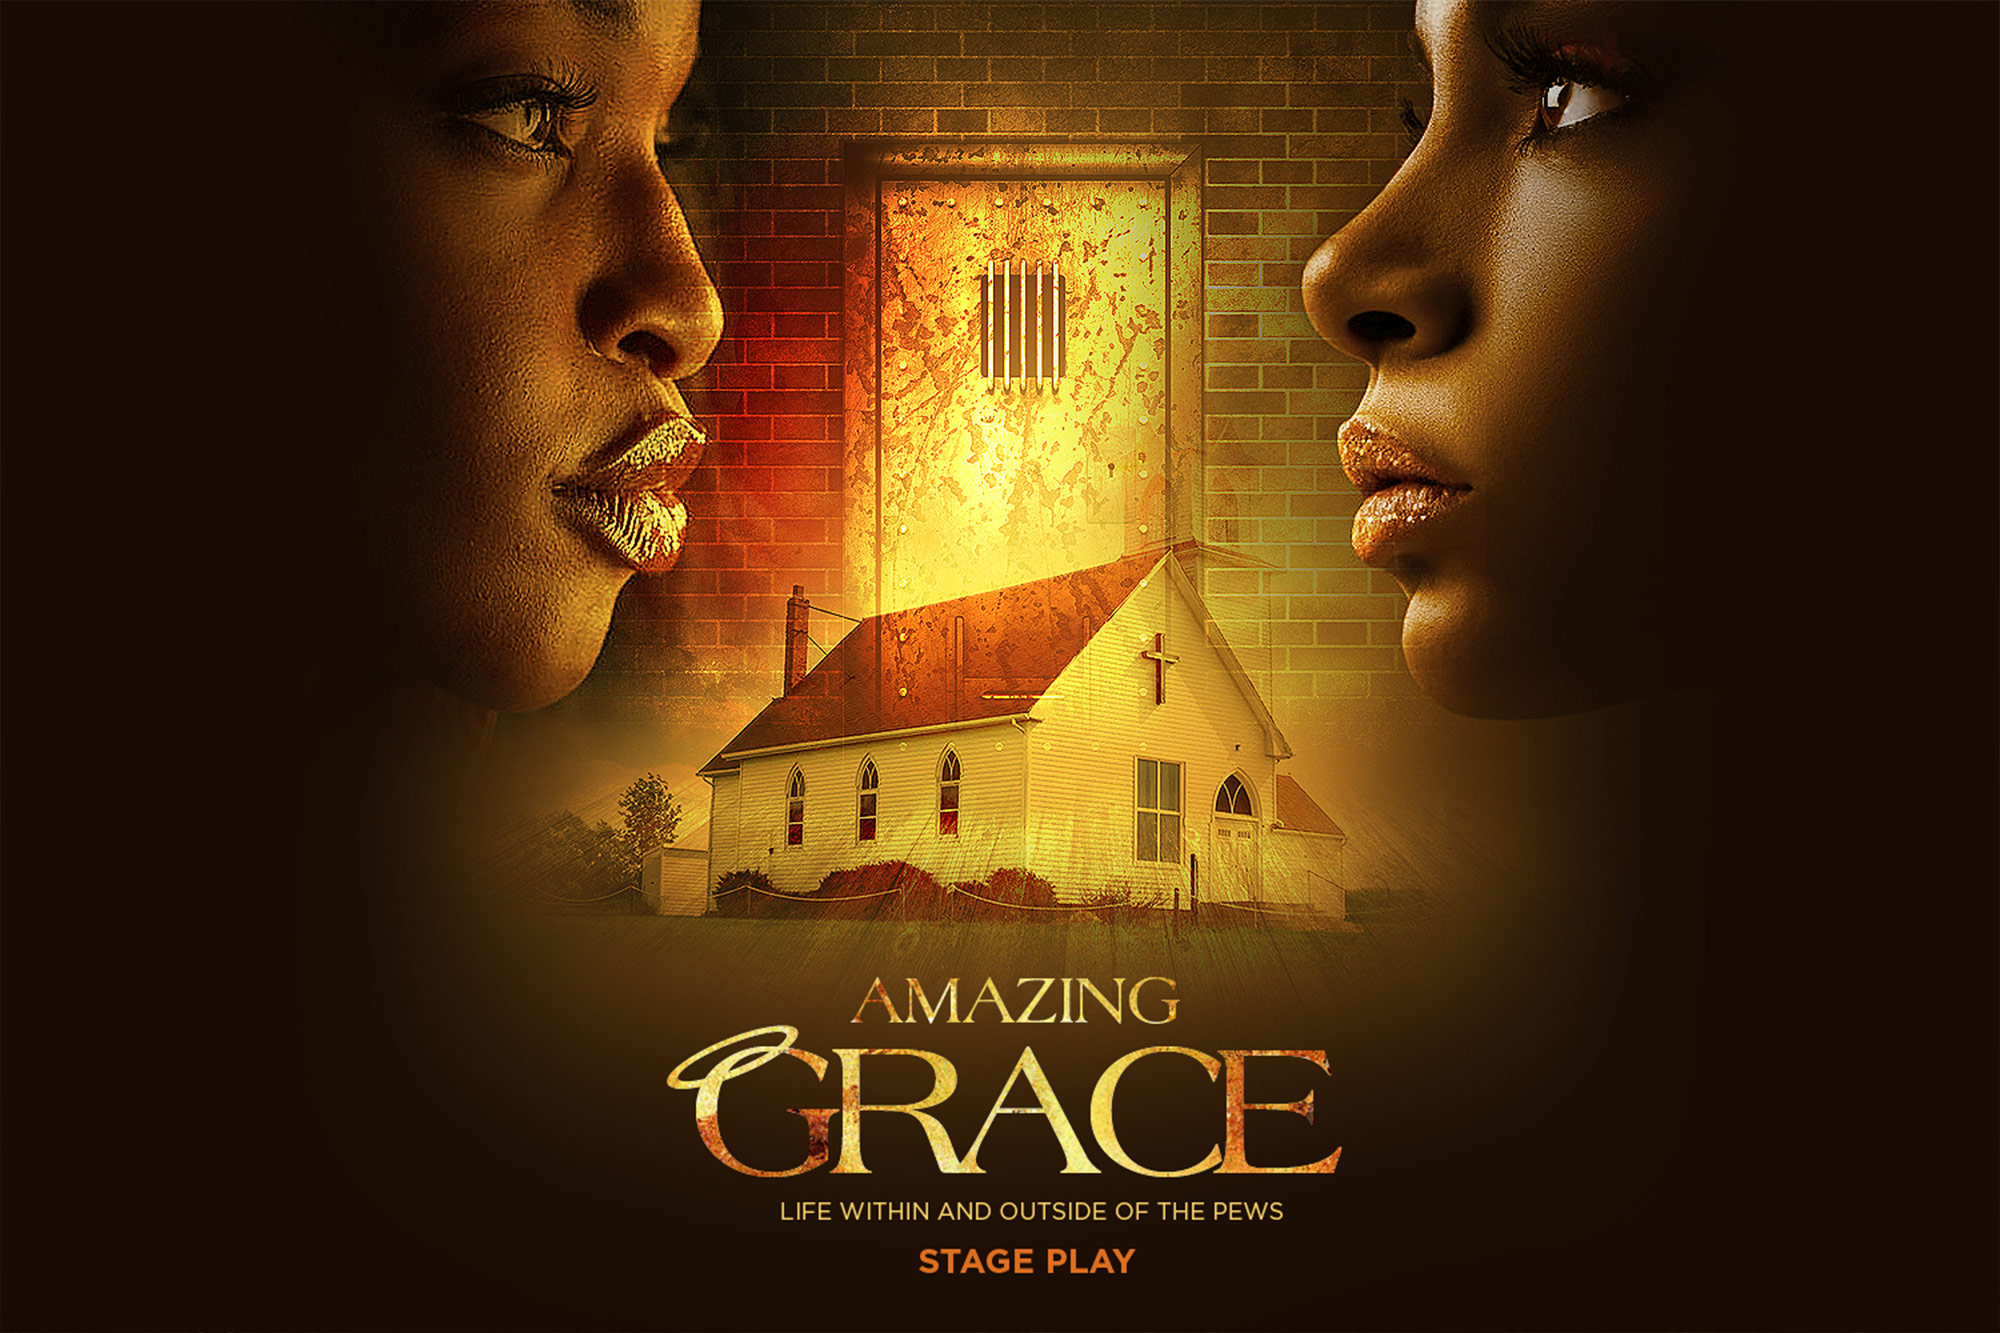 The Amazing Grace Musical Stage Play 2018 – Private Pain In Public Pews Part 4